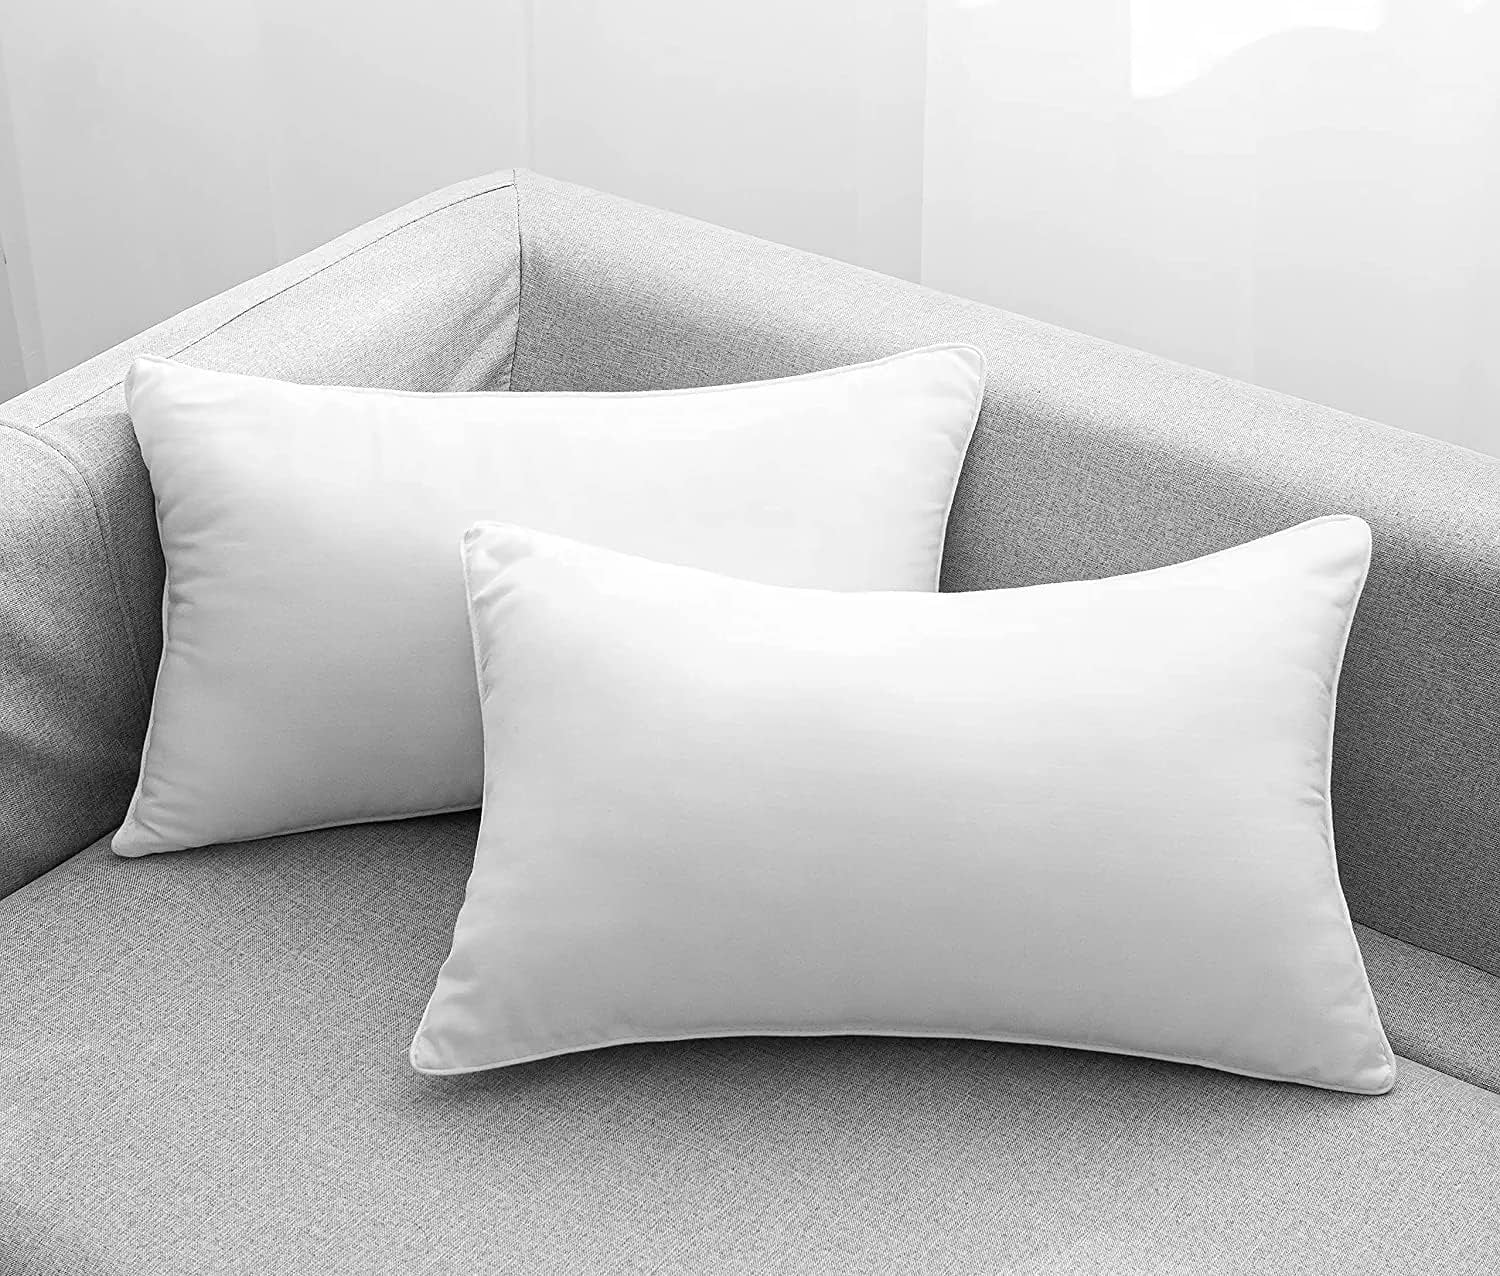 Sleepsia 20 x 20 Pillow Inserts (Set of 2) - Fluffy Polyester Down  Alternative Lightweight Bed and Couch Pillows - 20 Inch Square, Sofa  Decorative